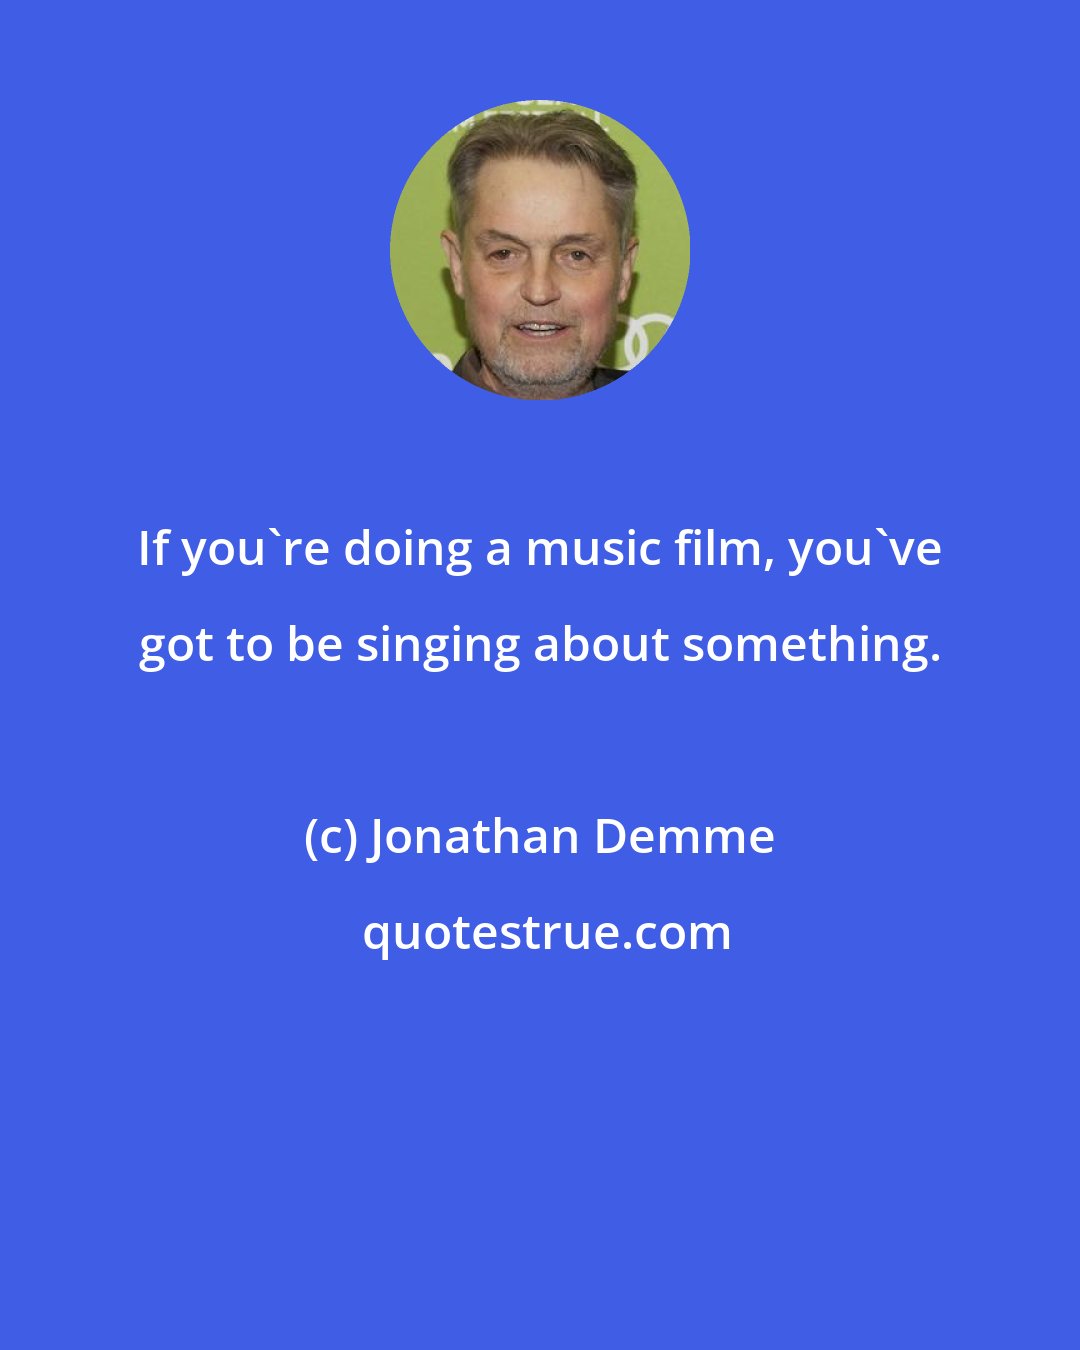 Jonathan Demme: If you're doing a music film, you've got to be singing about something.